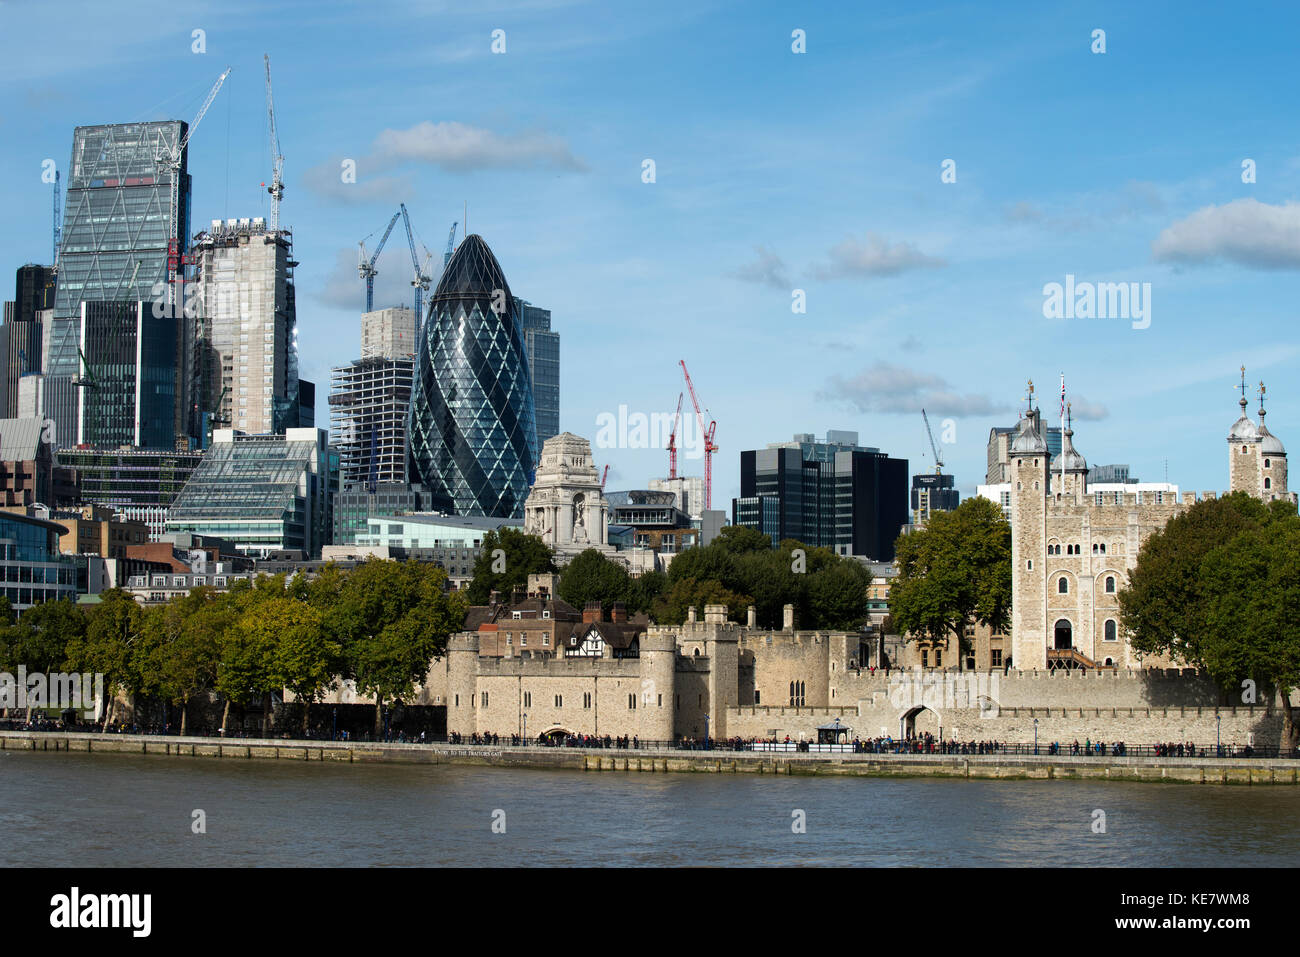 Tower of London with City of London Backdrop, London England. Oct 2017 Showing 30 St Mary Axe knowns as the Gerkin rising over the Tower of London. Th Stock Photo